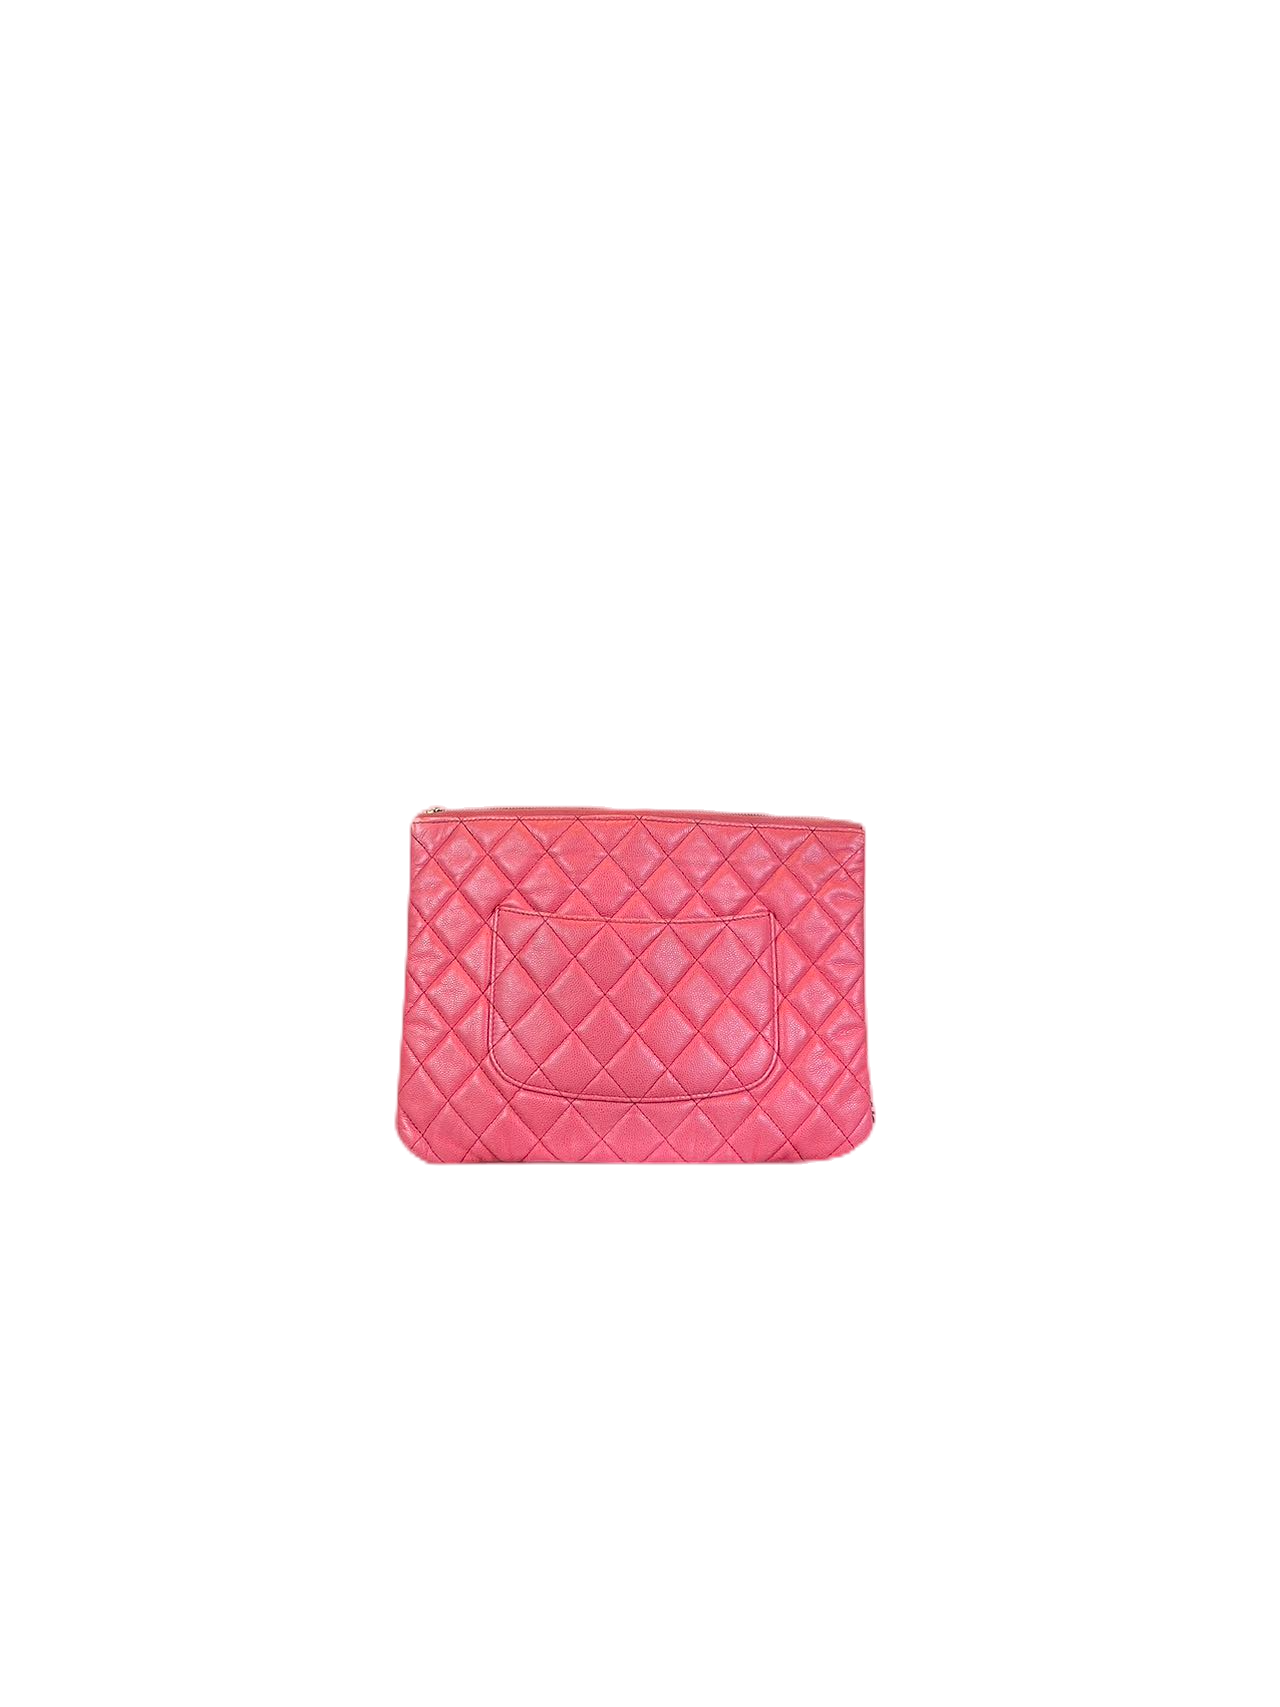 Preloved Chanel Pink Quilted Caviar Pouch Clutches